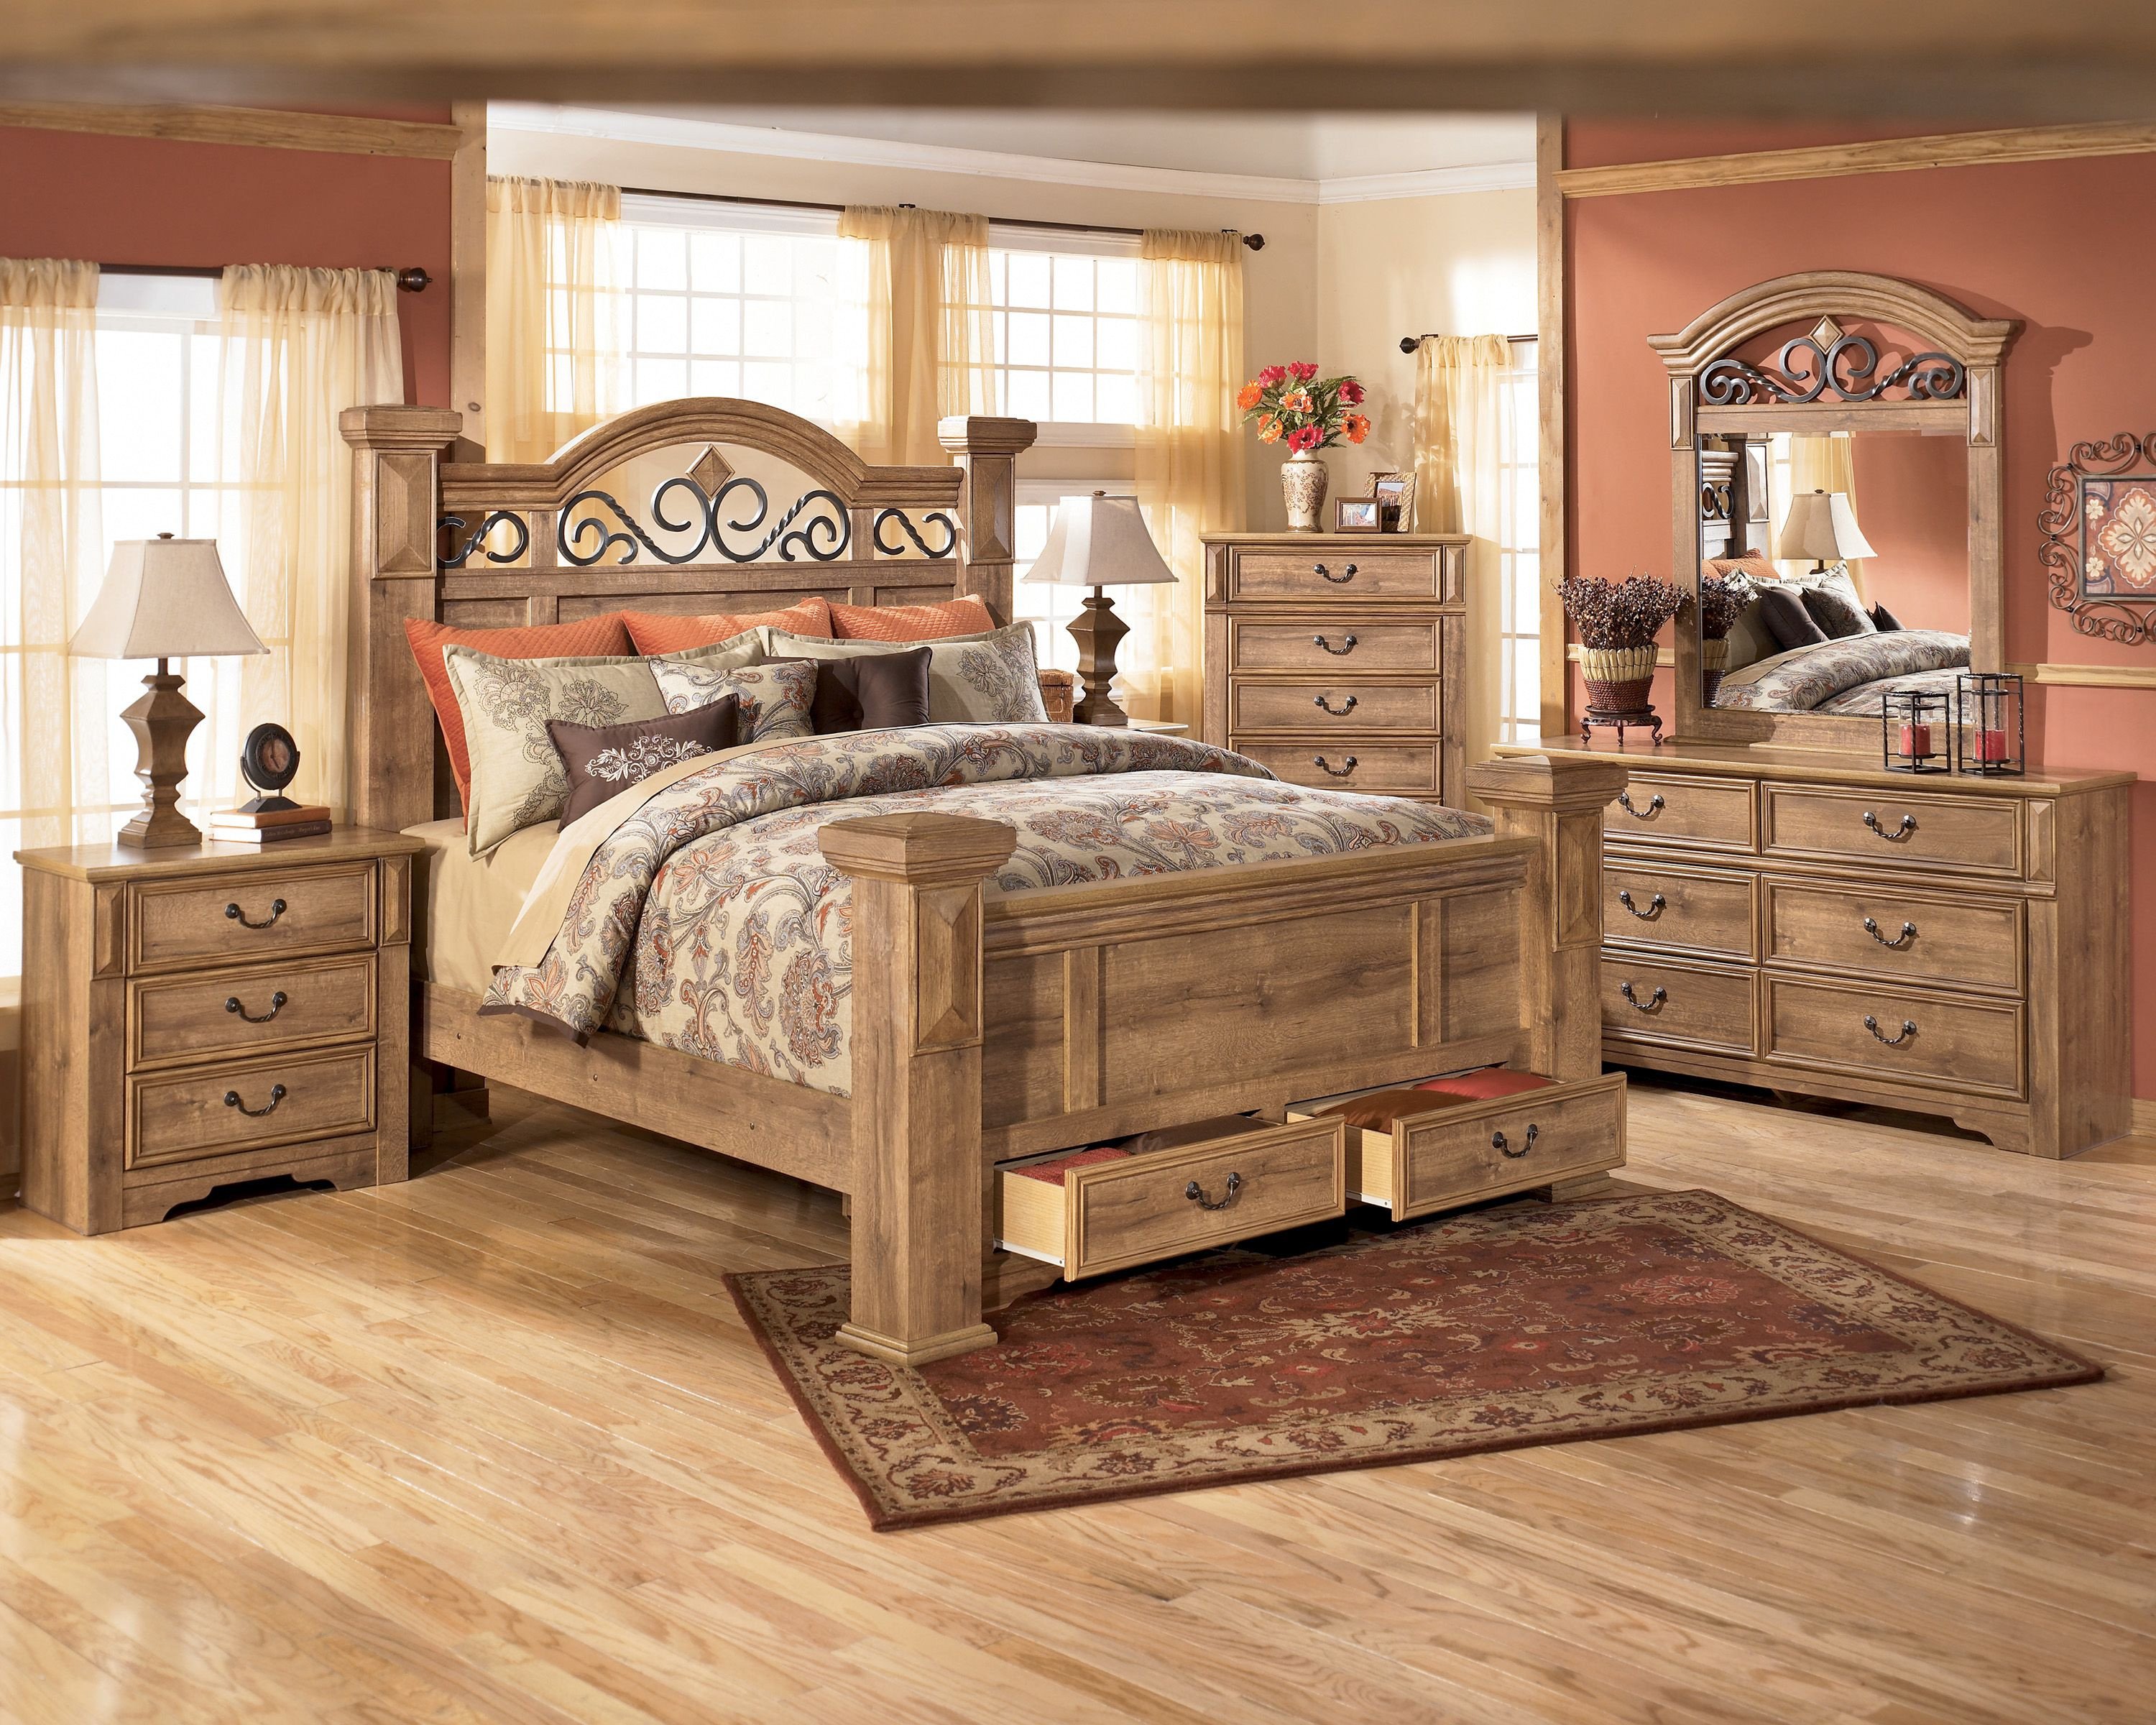 broyhill bedroom furniture for sale